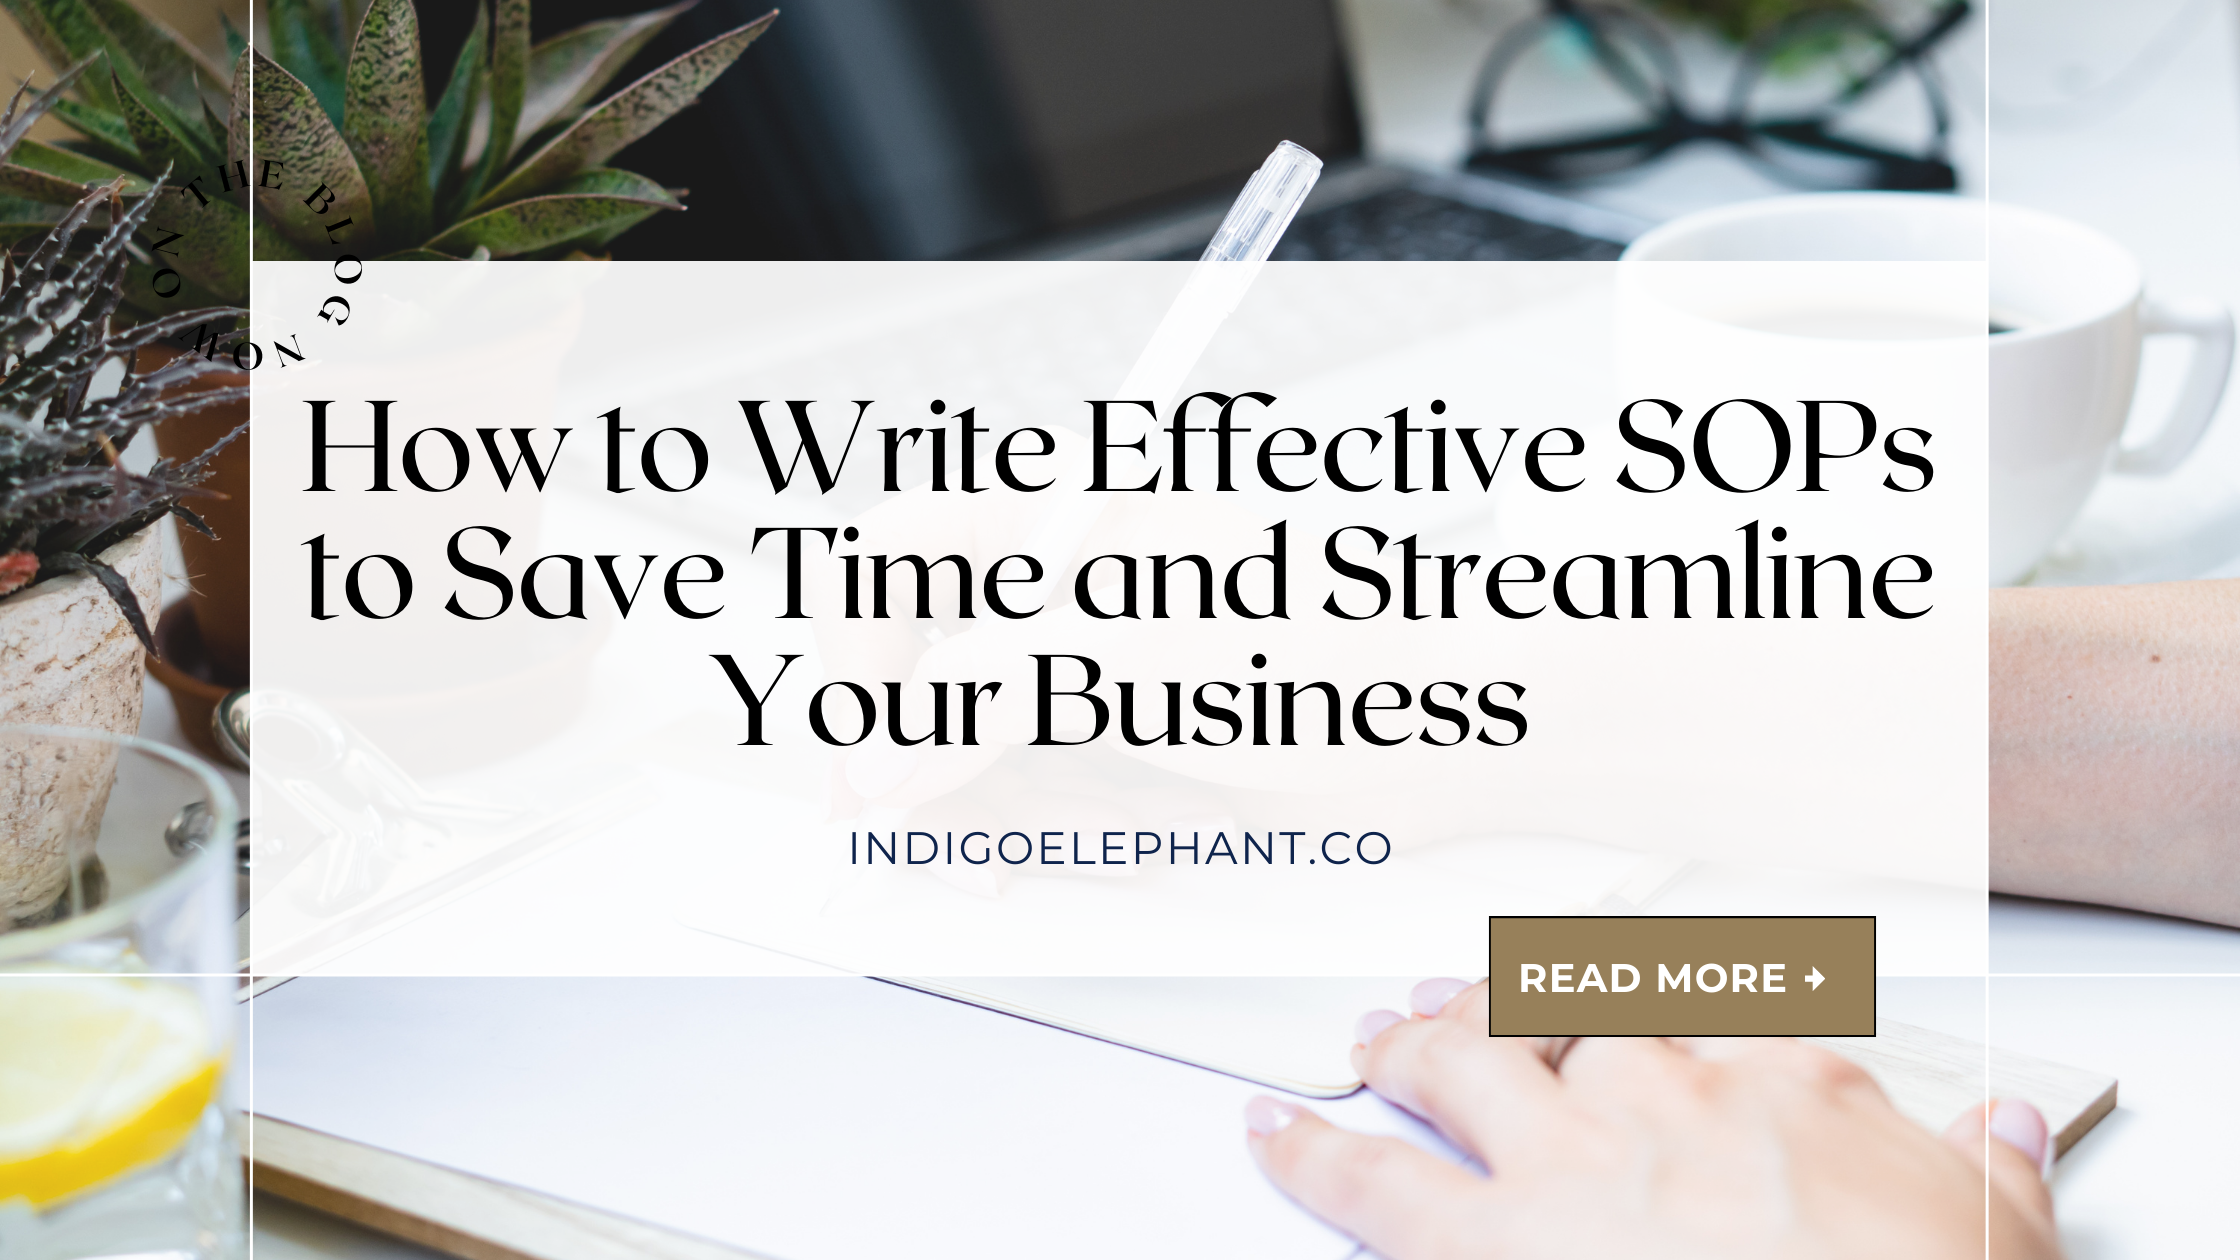 How to Write Effective SOPs to Save Time and Streamline Your Business